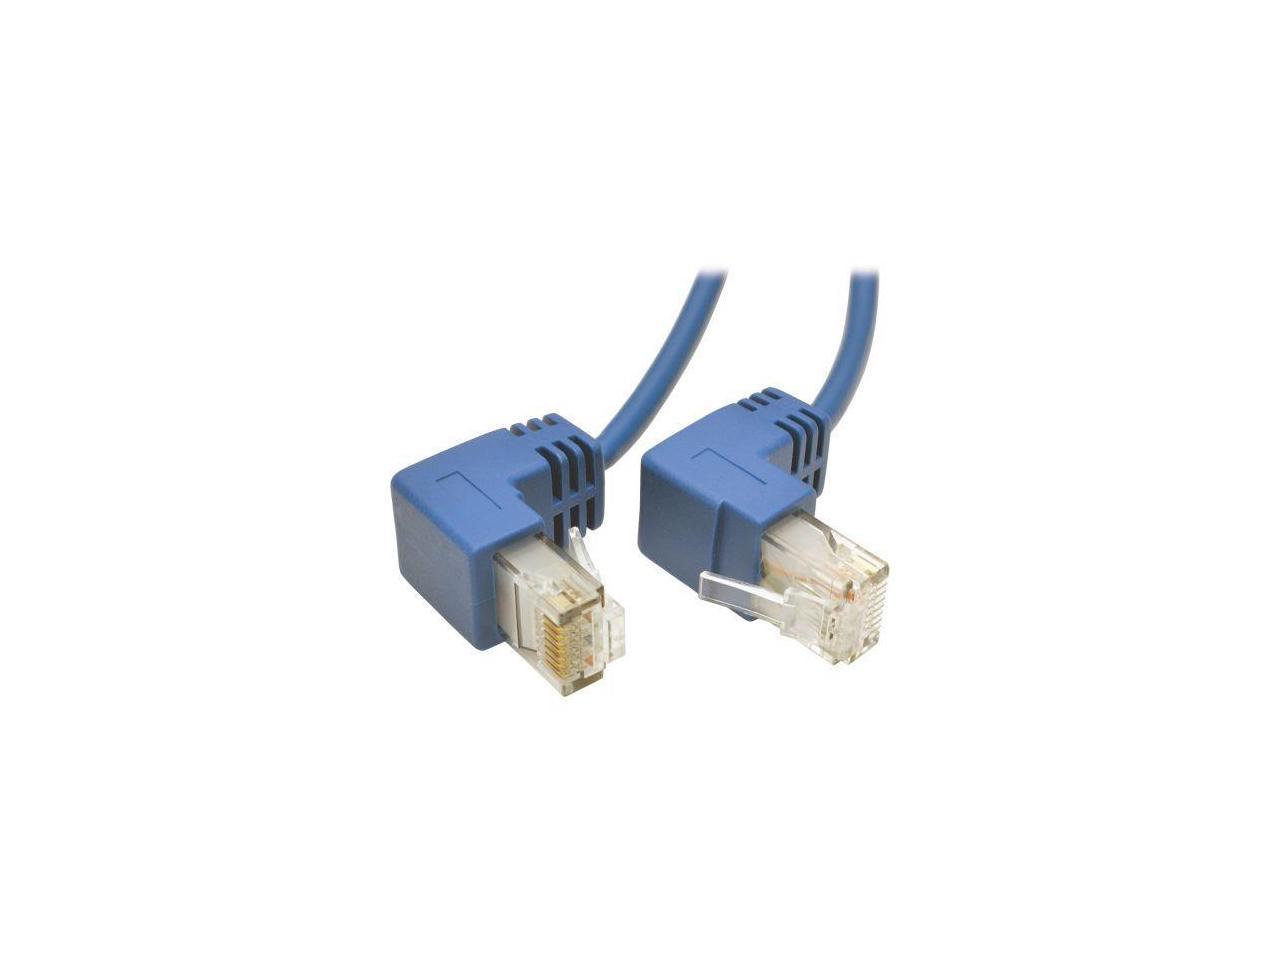 Tripp Lite Cat6 Gigabit Snagless Molded Slim UTP Patch Cable with Right-Angle Connectors (RJ45 M/M), Blue, 1 ft. (N201-SR1-BL)